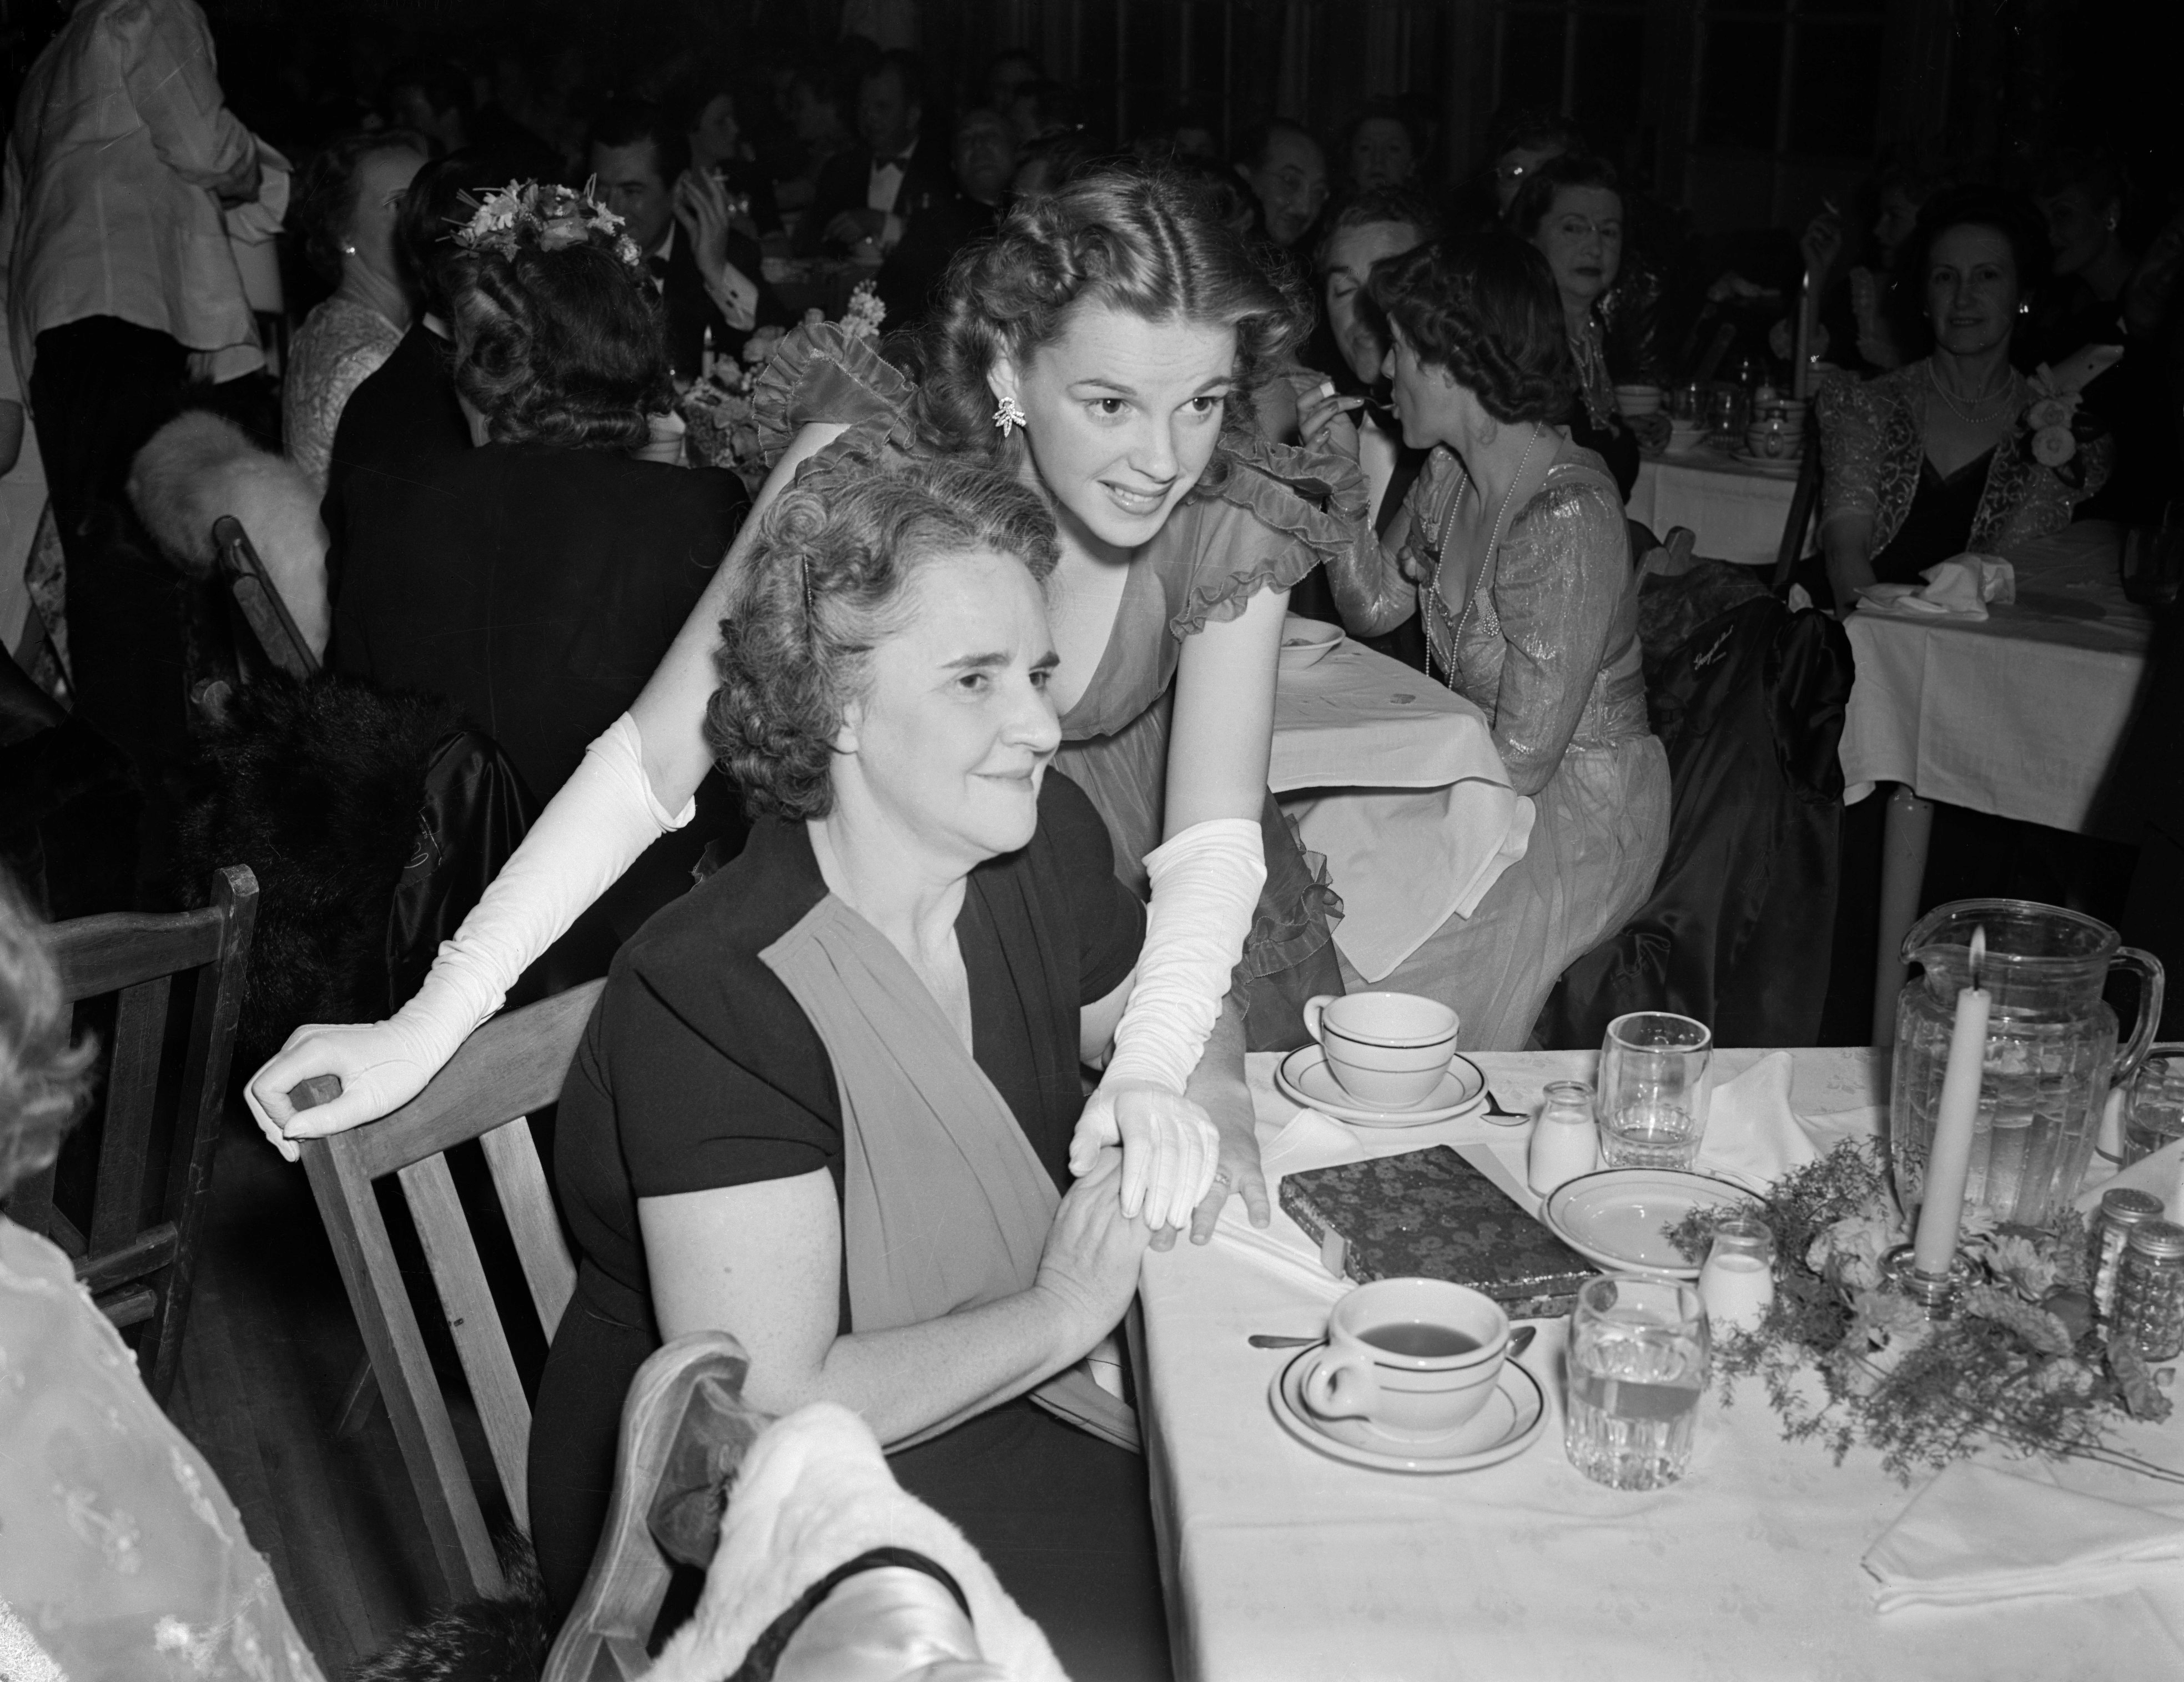 Judy Garland poses for a photo with her mother, Ethel